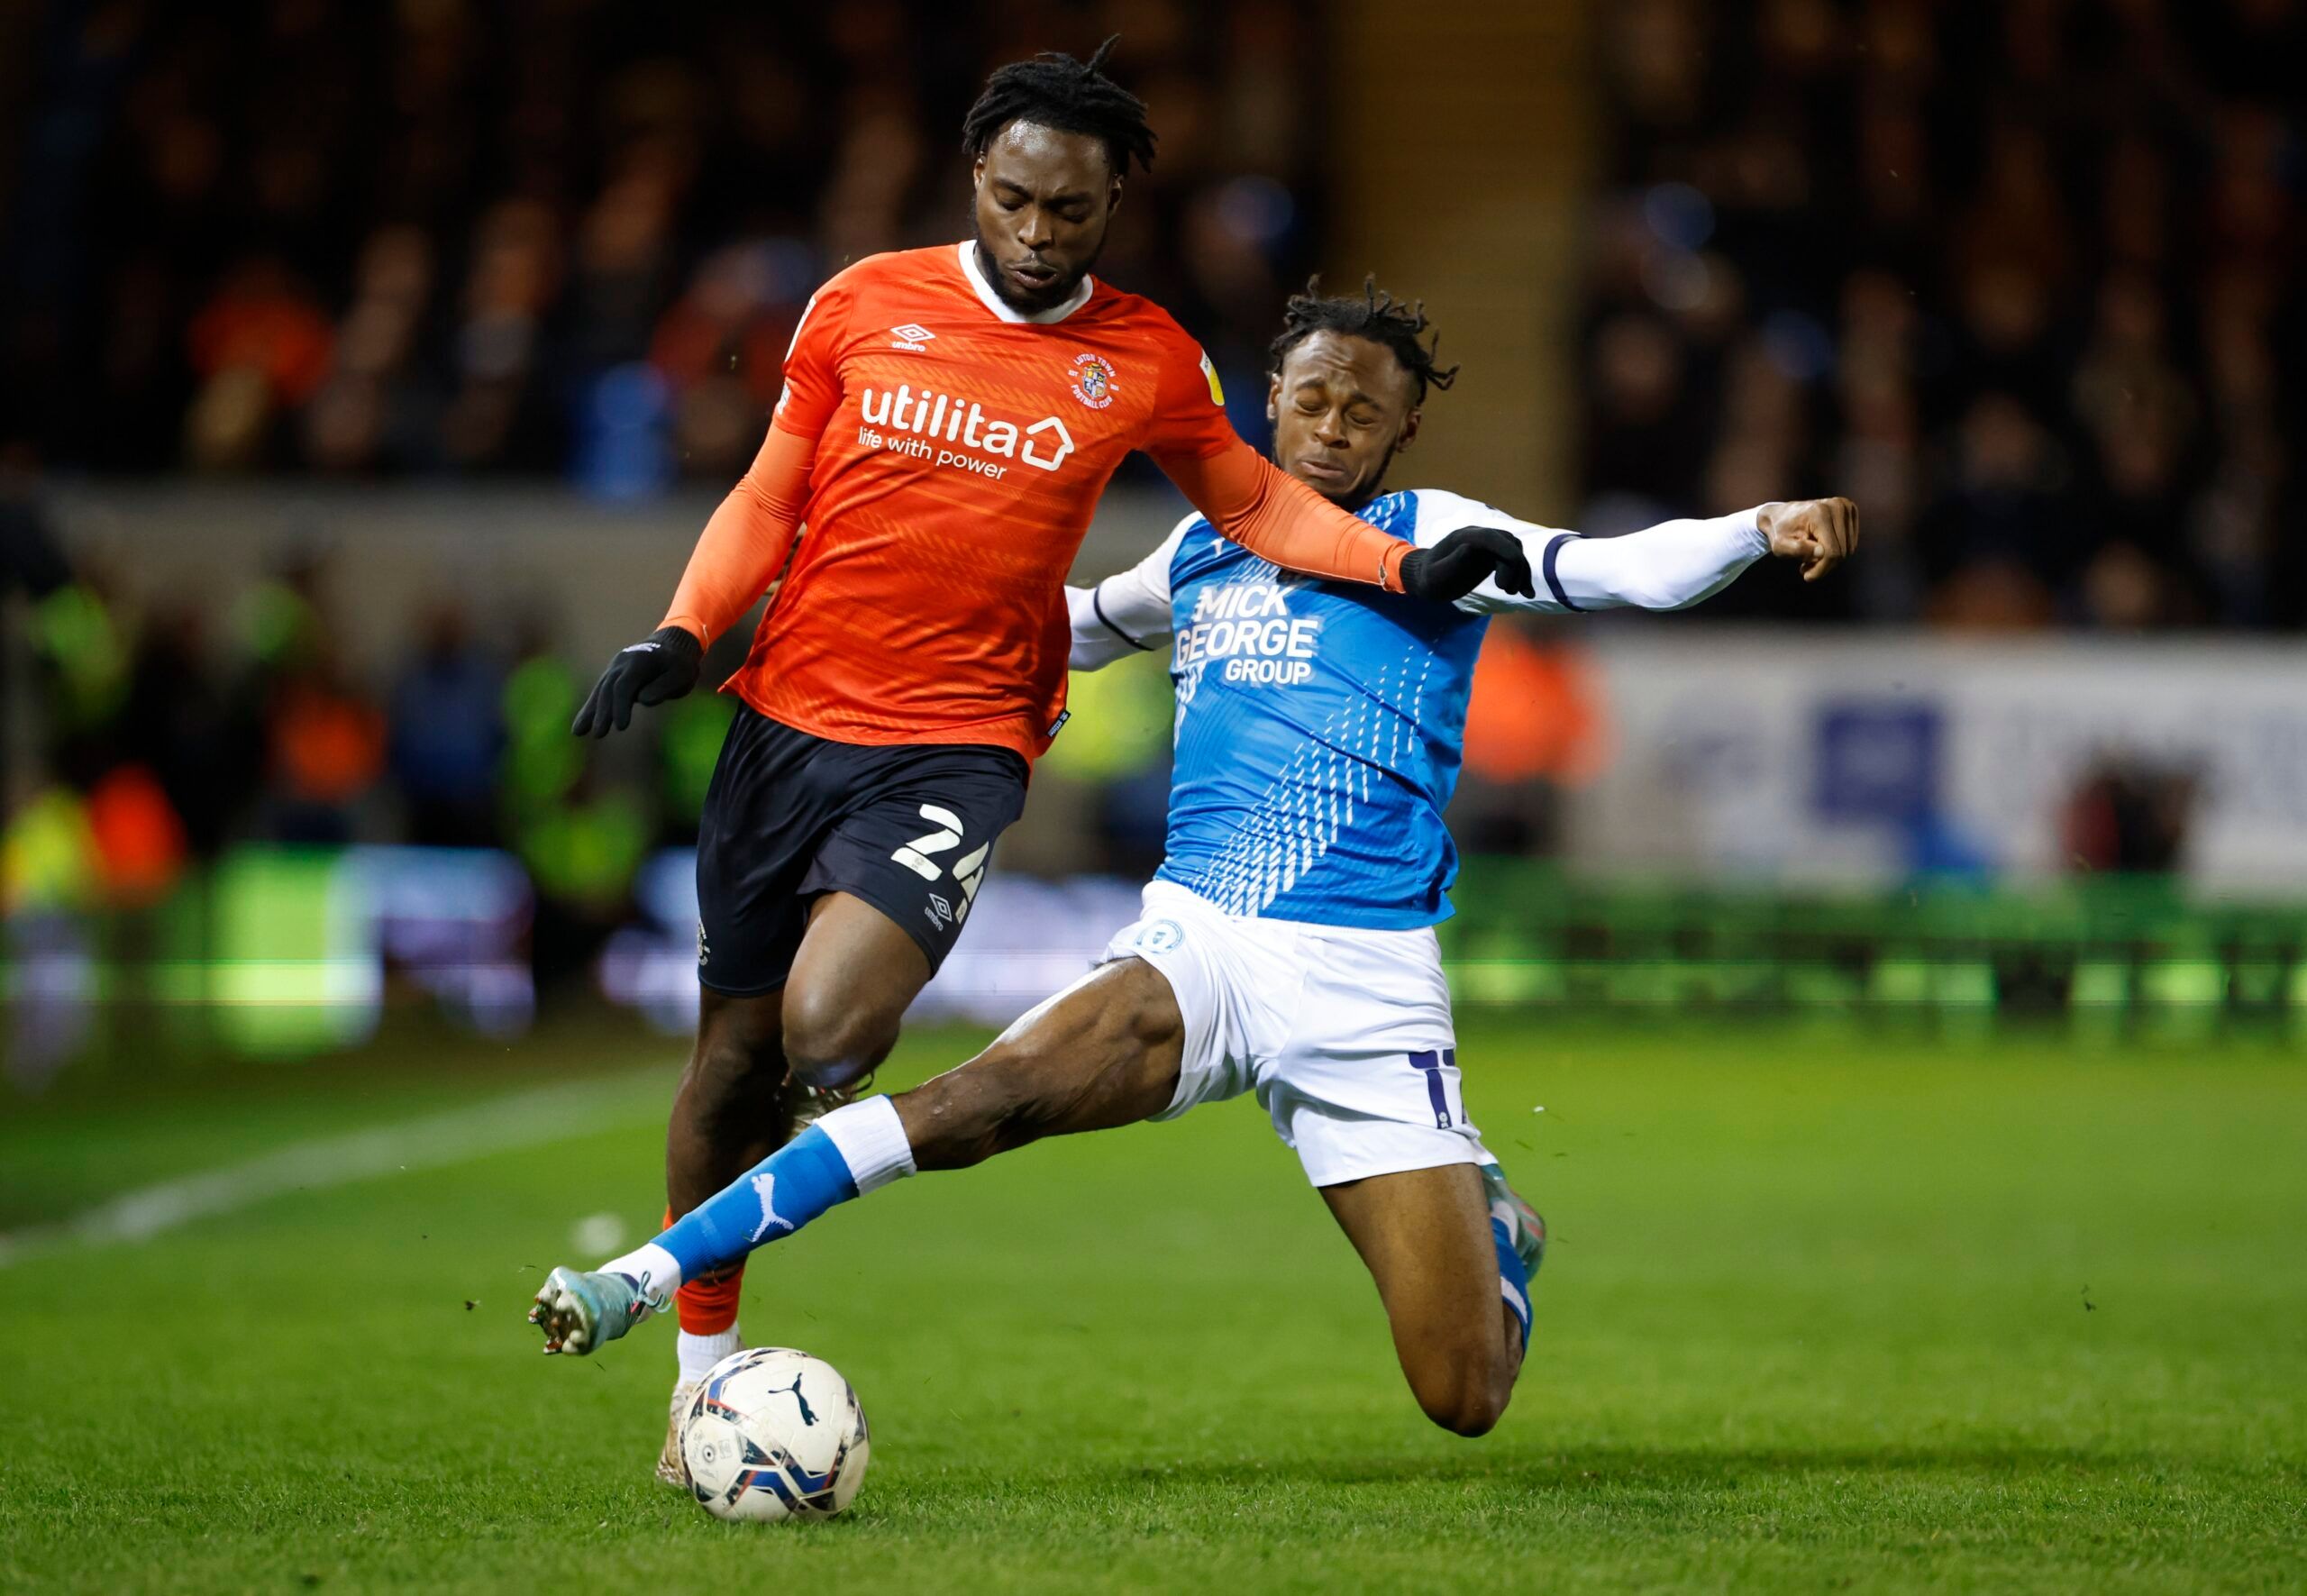 Soccer Football - Championship - Peterborough United v Luton Town - Weston Homes Stadium, Peterborough, Britain - April 5, 2022 Luton Town's Fred Onyedinma in action with Peterborough United's Ricky Jade-Jones Action Images/Peter Cziborra EDITORIAL USE ONLY. No use with unauthorized audio, video, data, fixture lists, club/league logos or 'live' services. Online in-match use limited to 75 images, no video emulation. No use in betting, games or single club /league/player publications.  Please cont